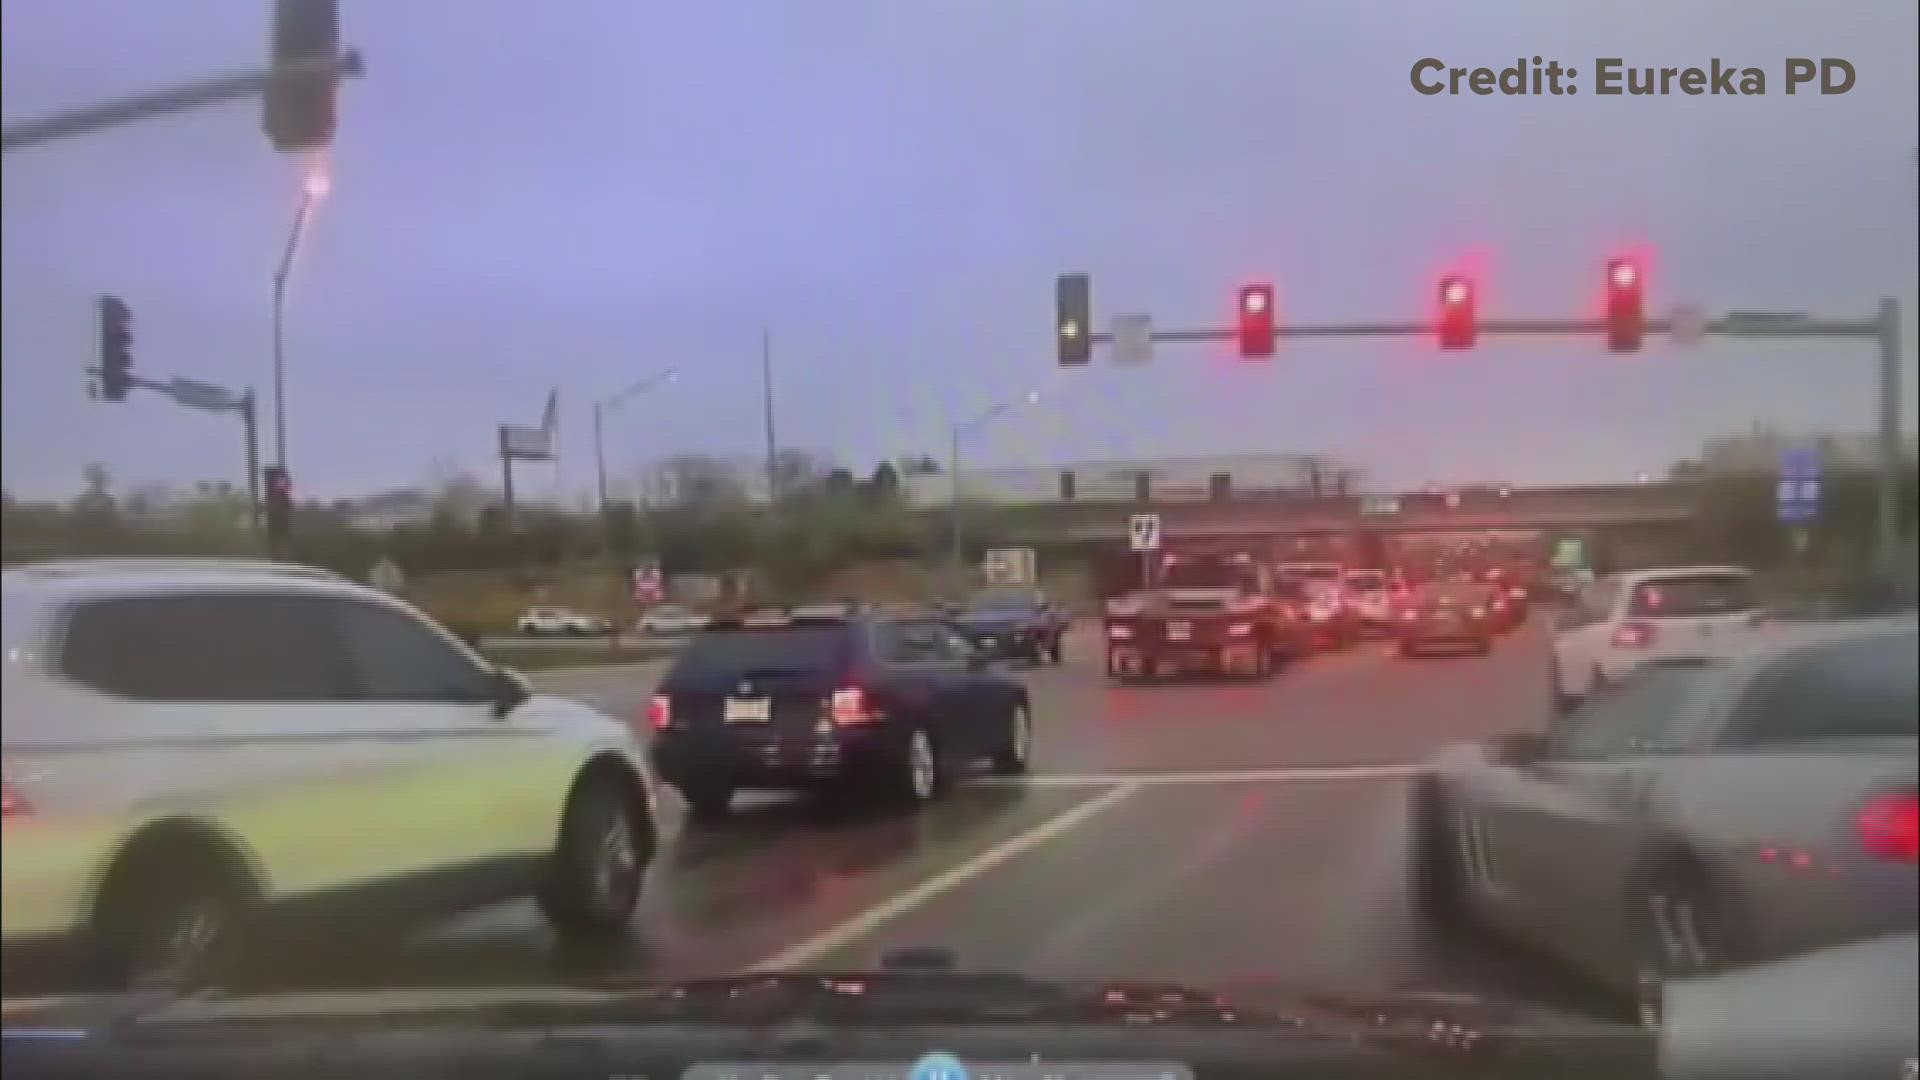 This dashcam footage is from the school resource officer's vehicle, which was hit during the incident.